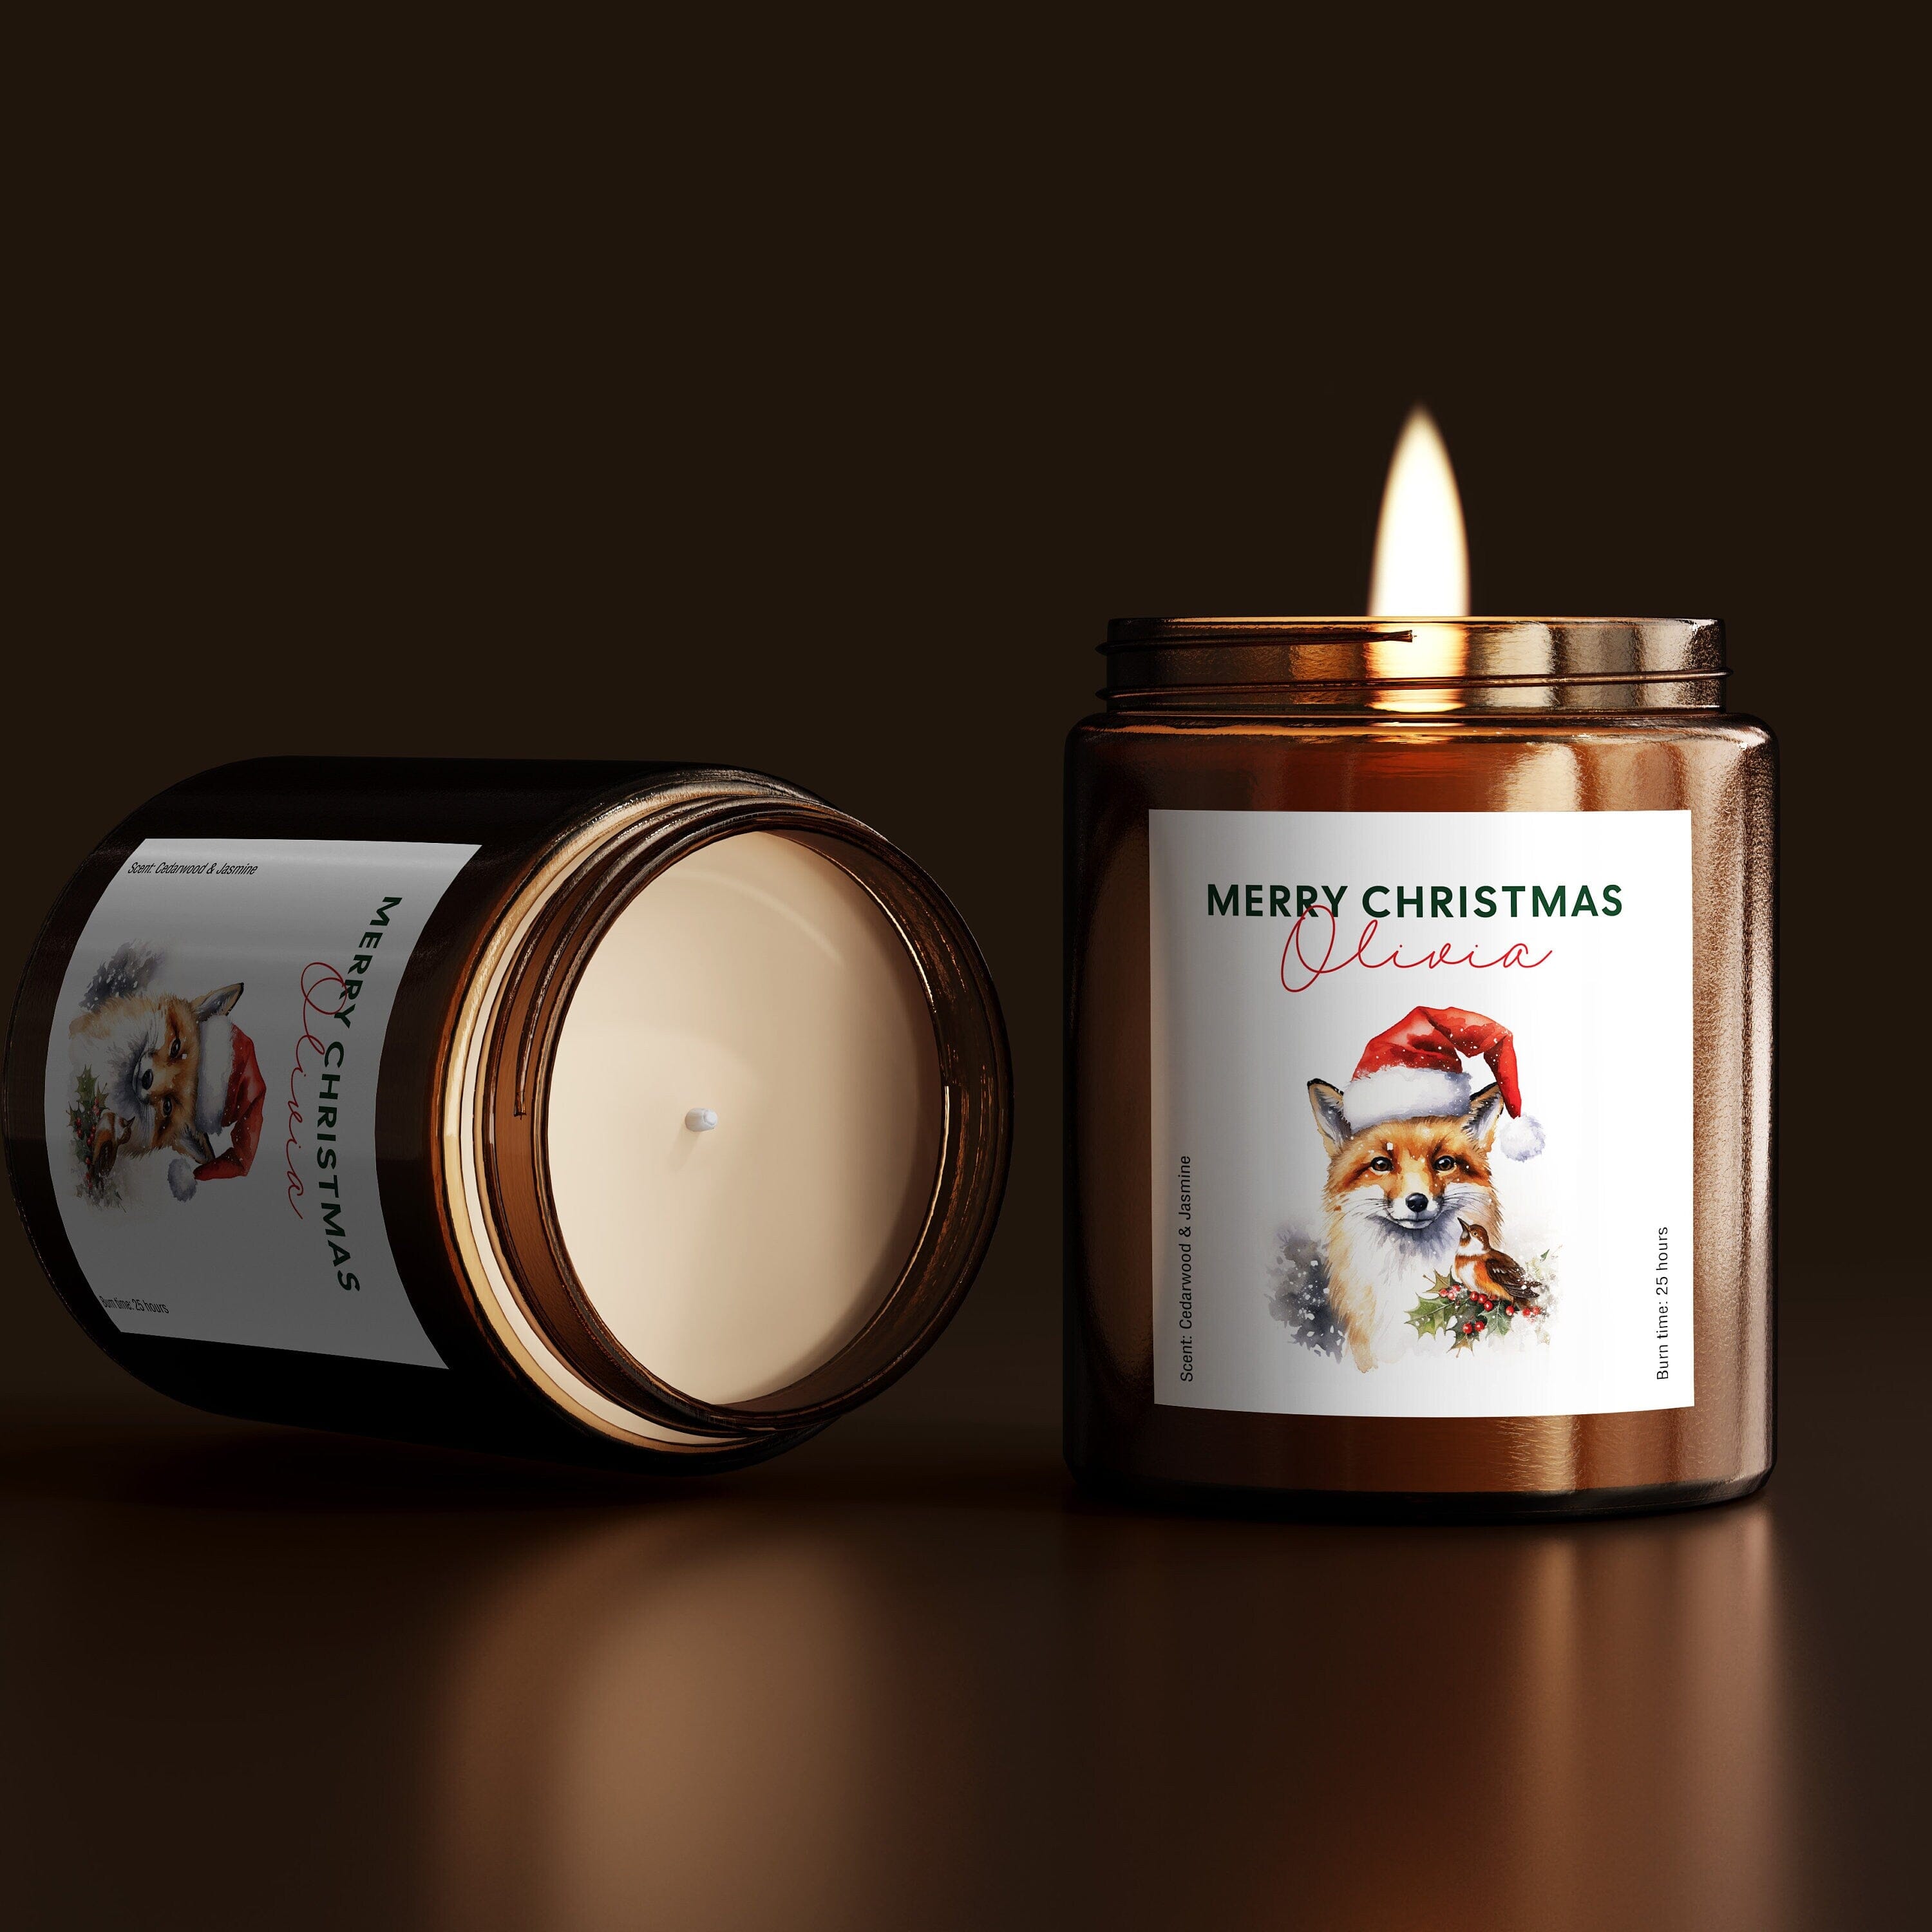 Personalised Merry Christmas Scented Candle with Fox And Robin Bird w Santa Hat, Gift for Her Him Holiday Season Cosy Gift